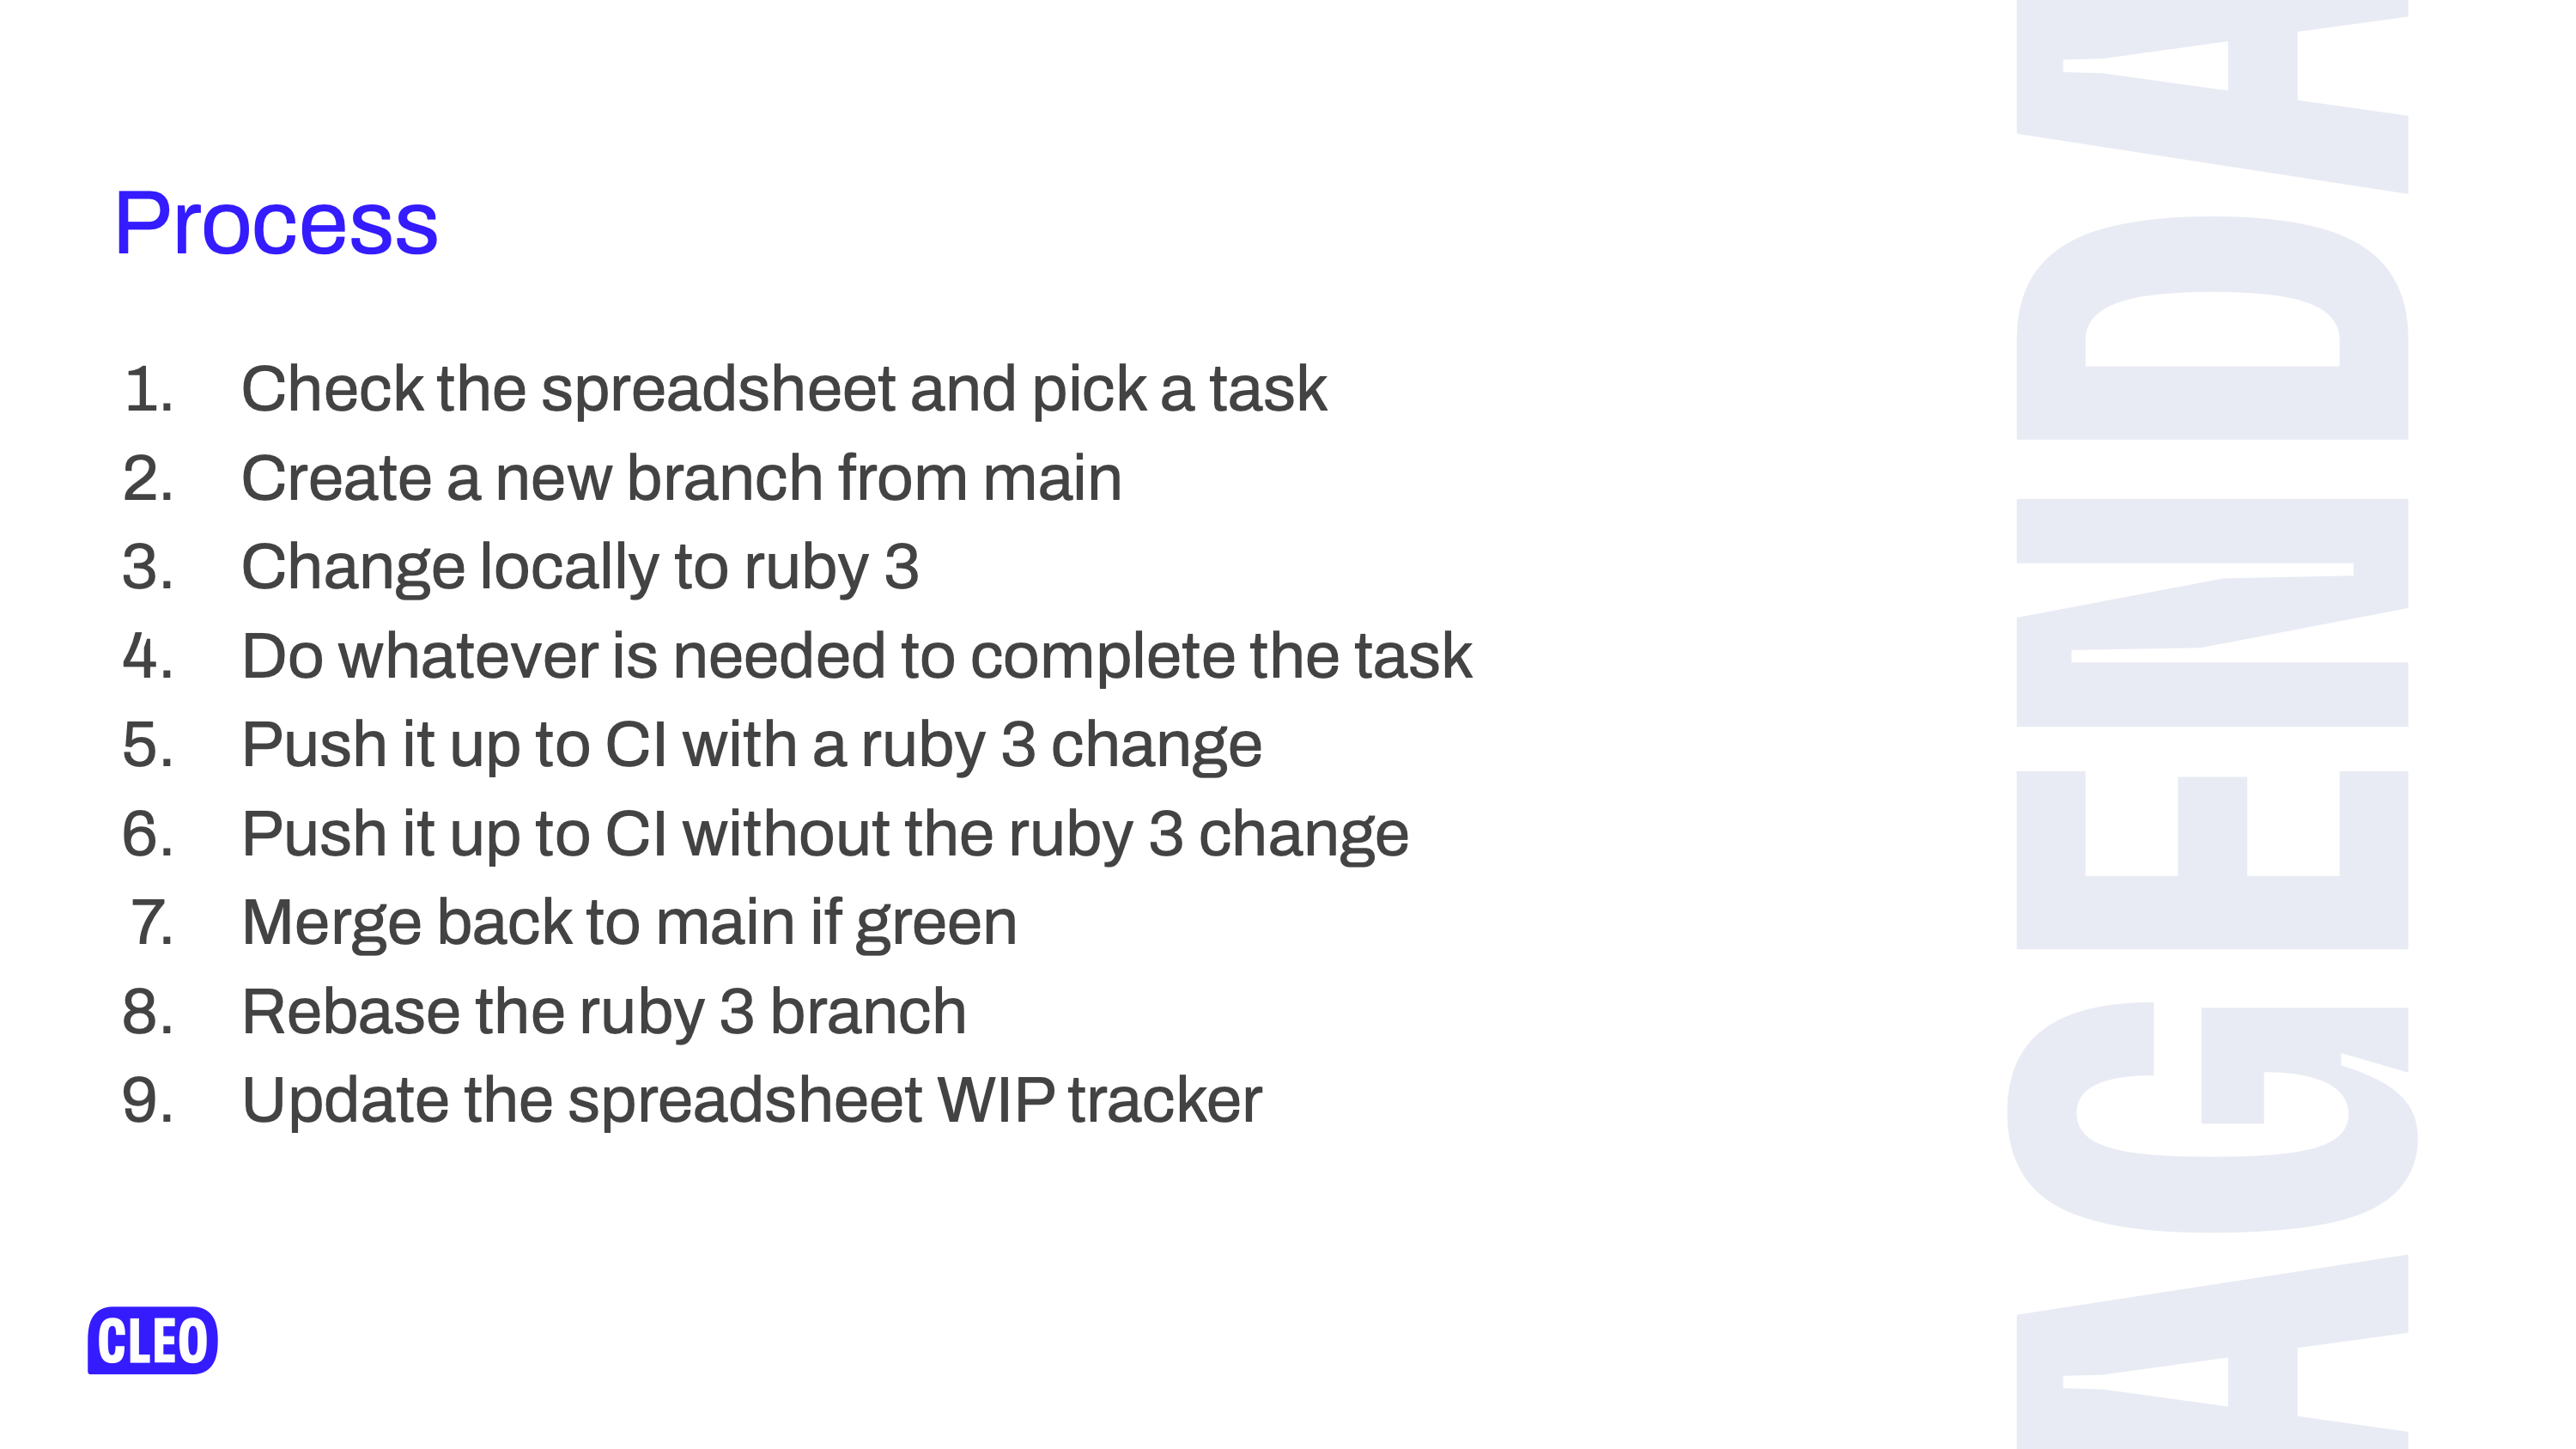 A 9-step process checlist for how we did all the work; text: Process, 1: check the spreadsheet and pick a task, 2: create a new branch from main, 3: change locally to ruby 3, 4: do whatever is needed to complete the task, 5: push it up to CI with a ruby 3 change, 6: push it up to CI without the ruby 3 change, 7: merge back to main if green, 8: rebase the ruby 3 branch, 9: update the spreadsheet WIP tracker